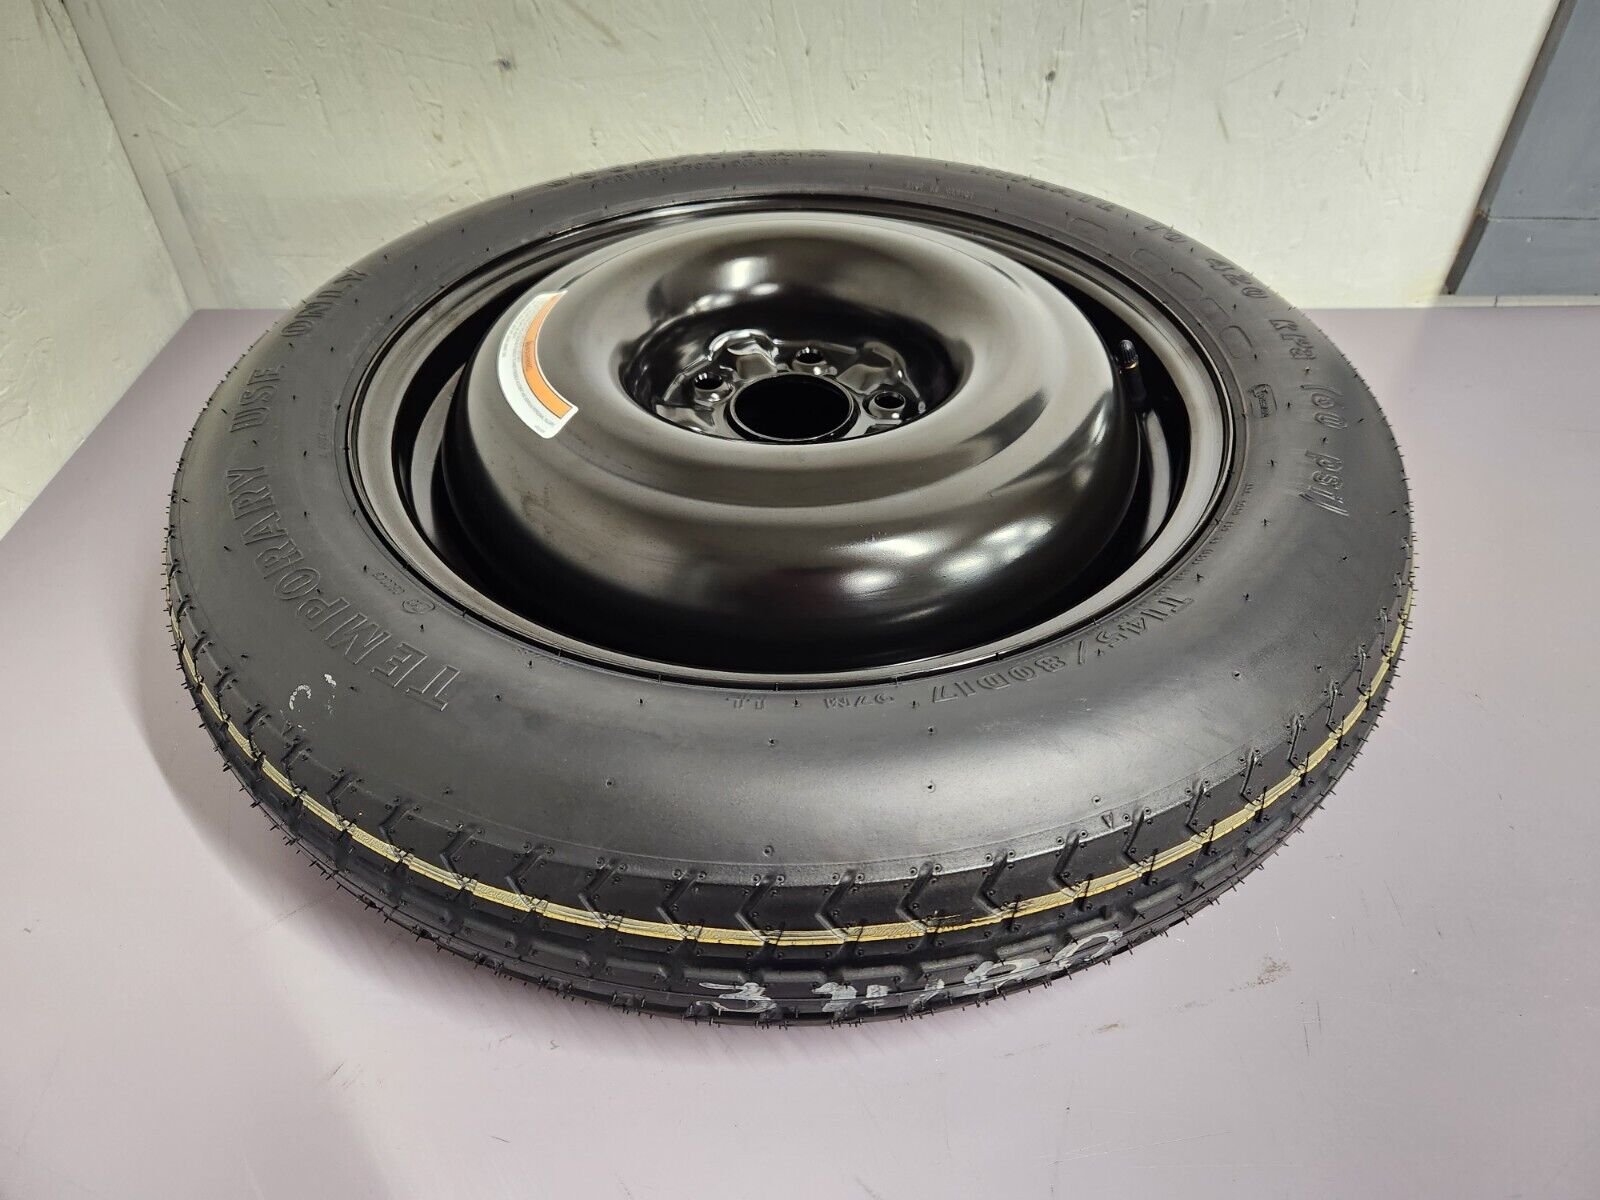 2004-2021 Nissan Maxima Spare Tire Compact Donut Wheel OEM T145/80D17 #M177